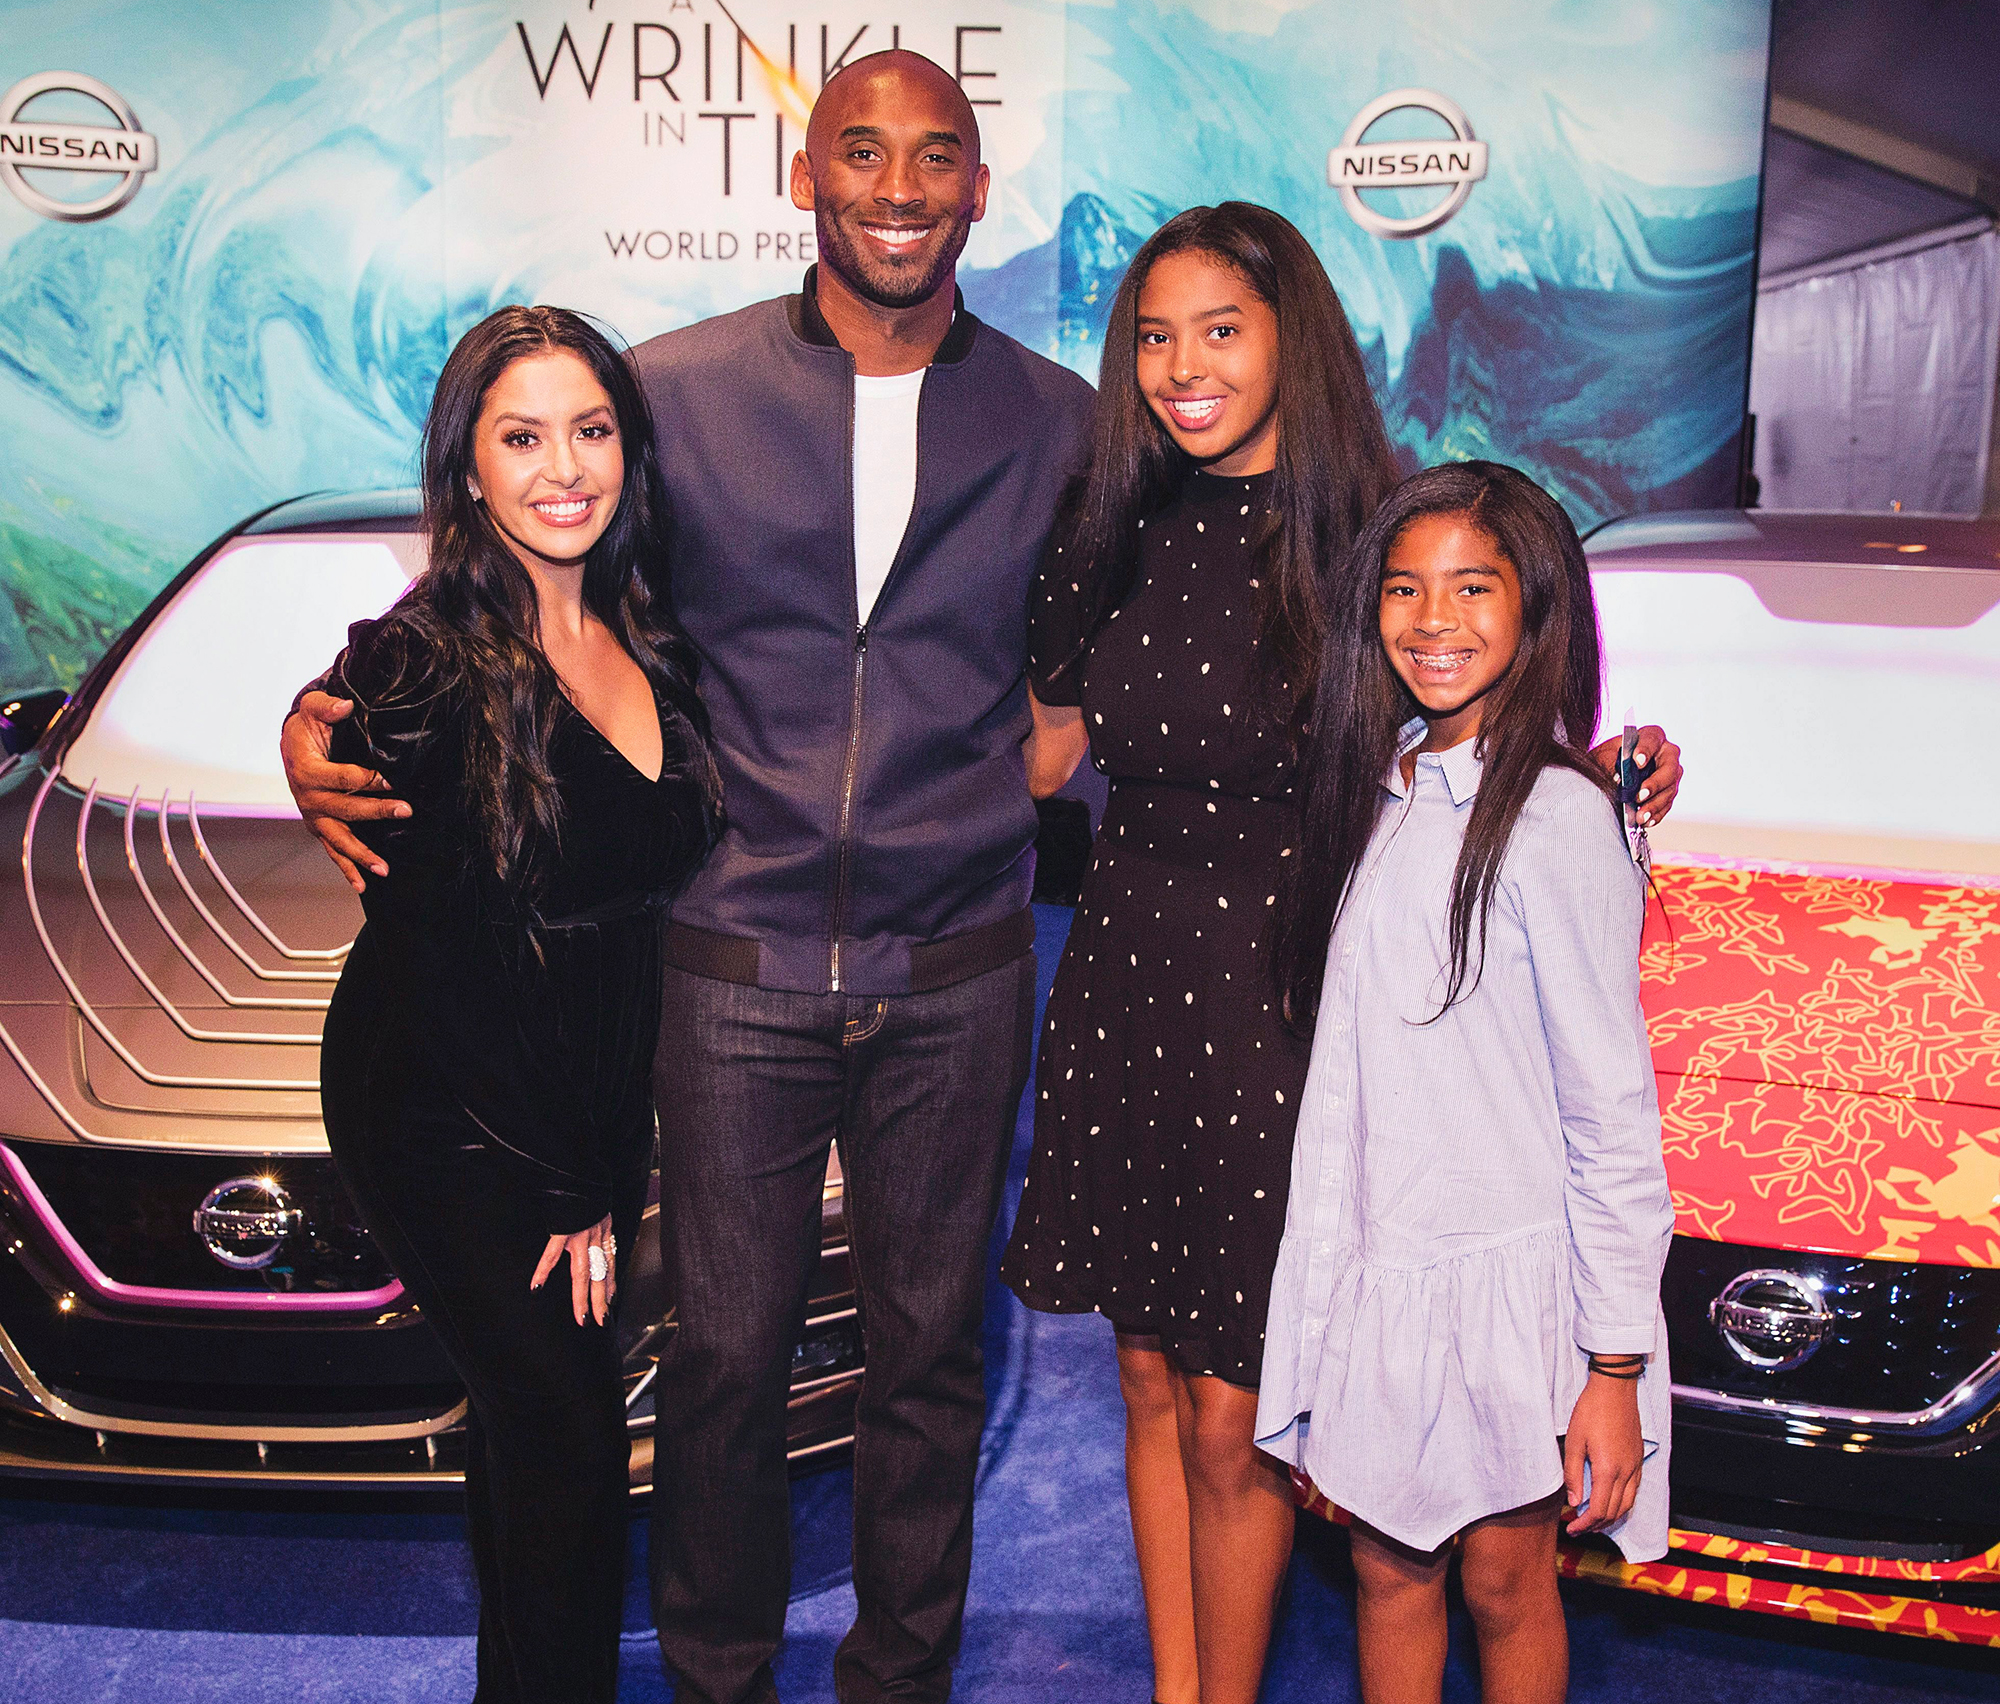 Does Kobe Bryant's family have a case? - Rafi Law Firm